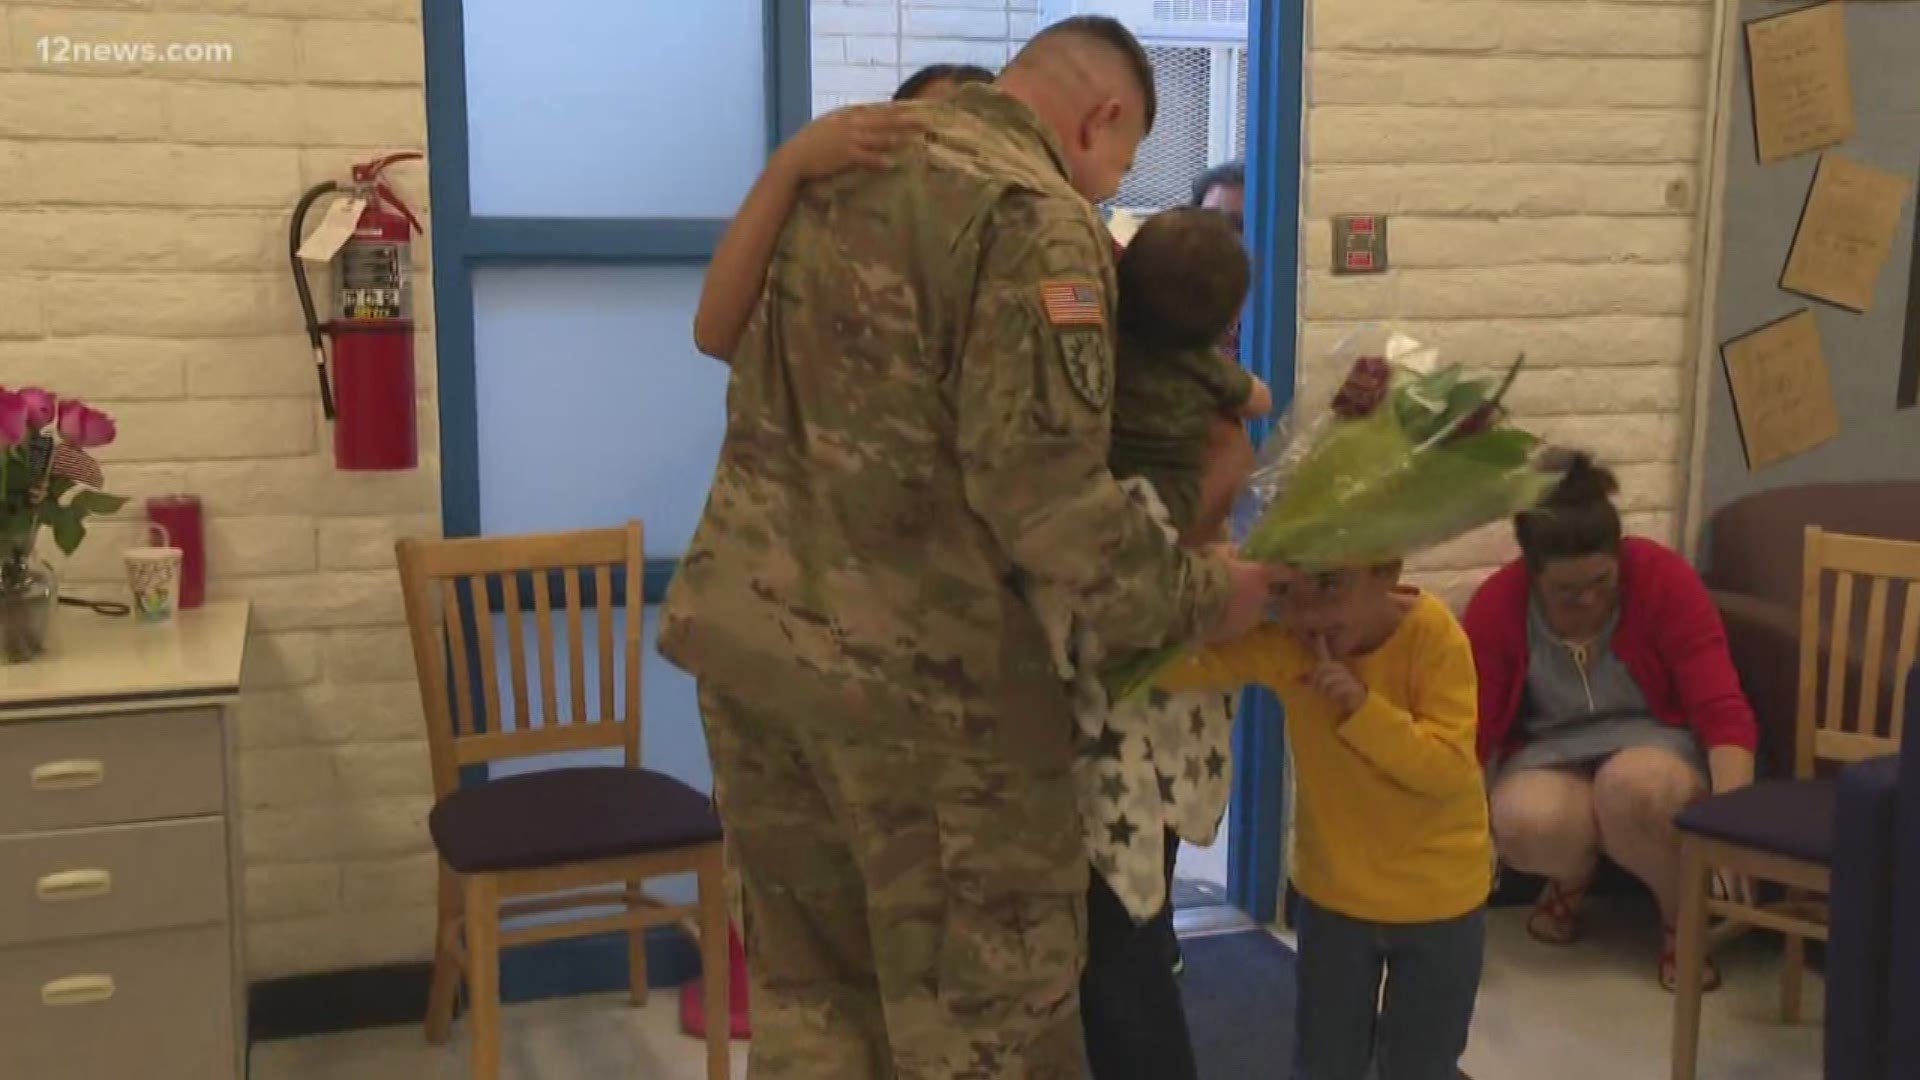 It was a heartwarming moment at Sacaton Elementary School when a military dad, Army Specialist Freddie Chism, ended his deployment by surprising his son. Chism ended a year in Qatar reunited with his wife, Darice, and two sons, 1-year-old Liam and 6-year-old Jonny, a student at the school.